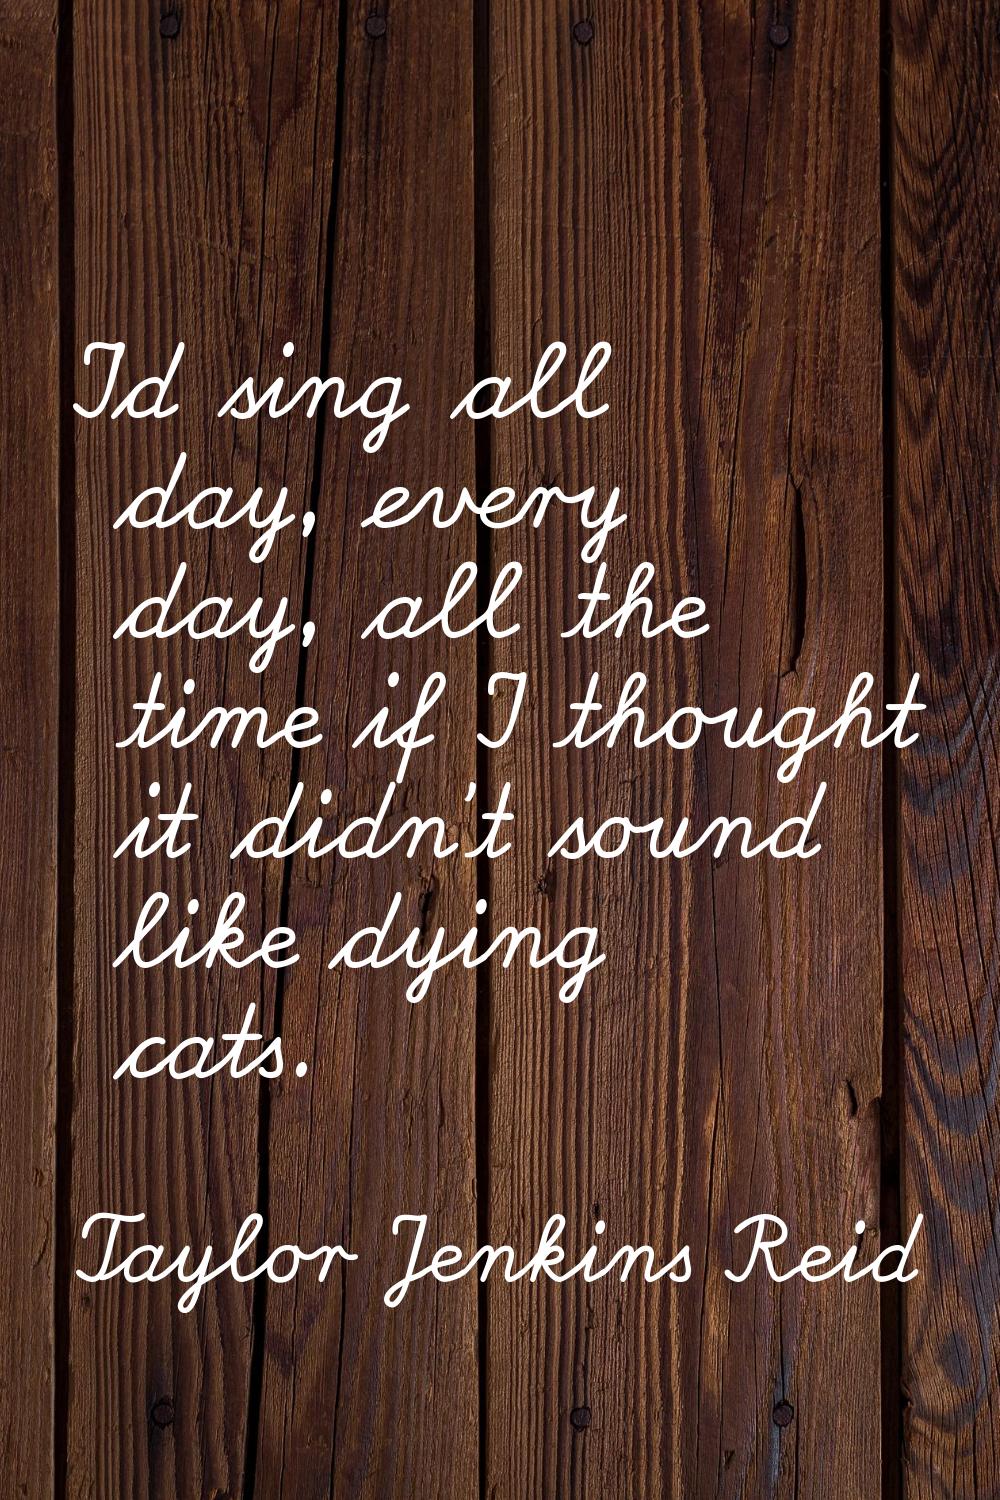 I'd sing all day, every day, all the time if I thought it didn't sound like dying cats.